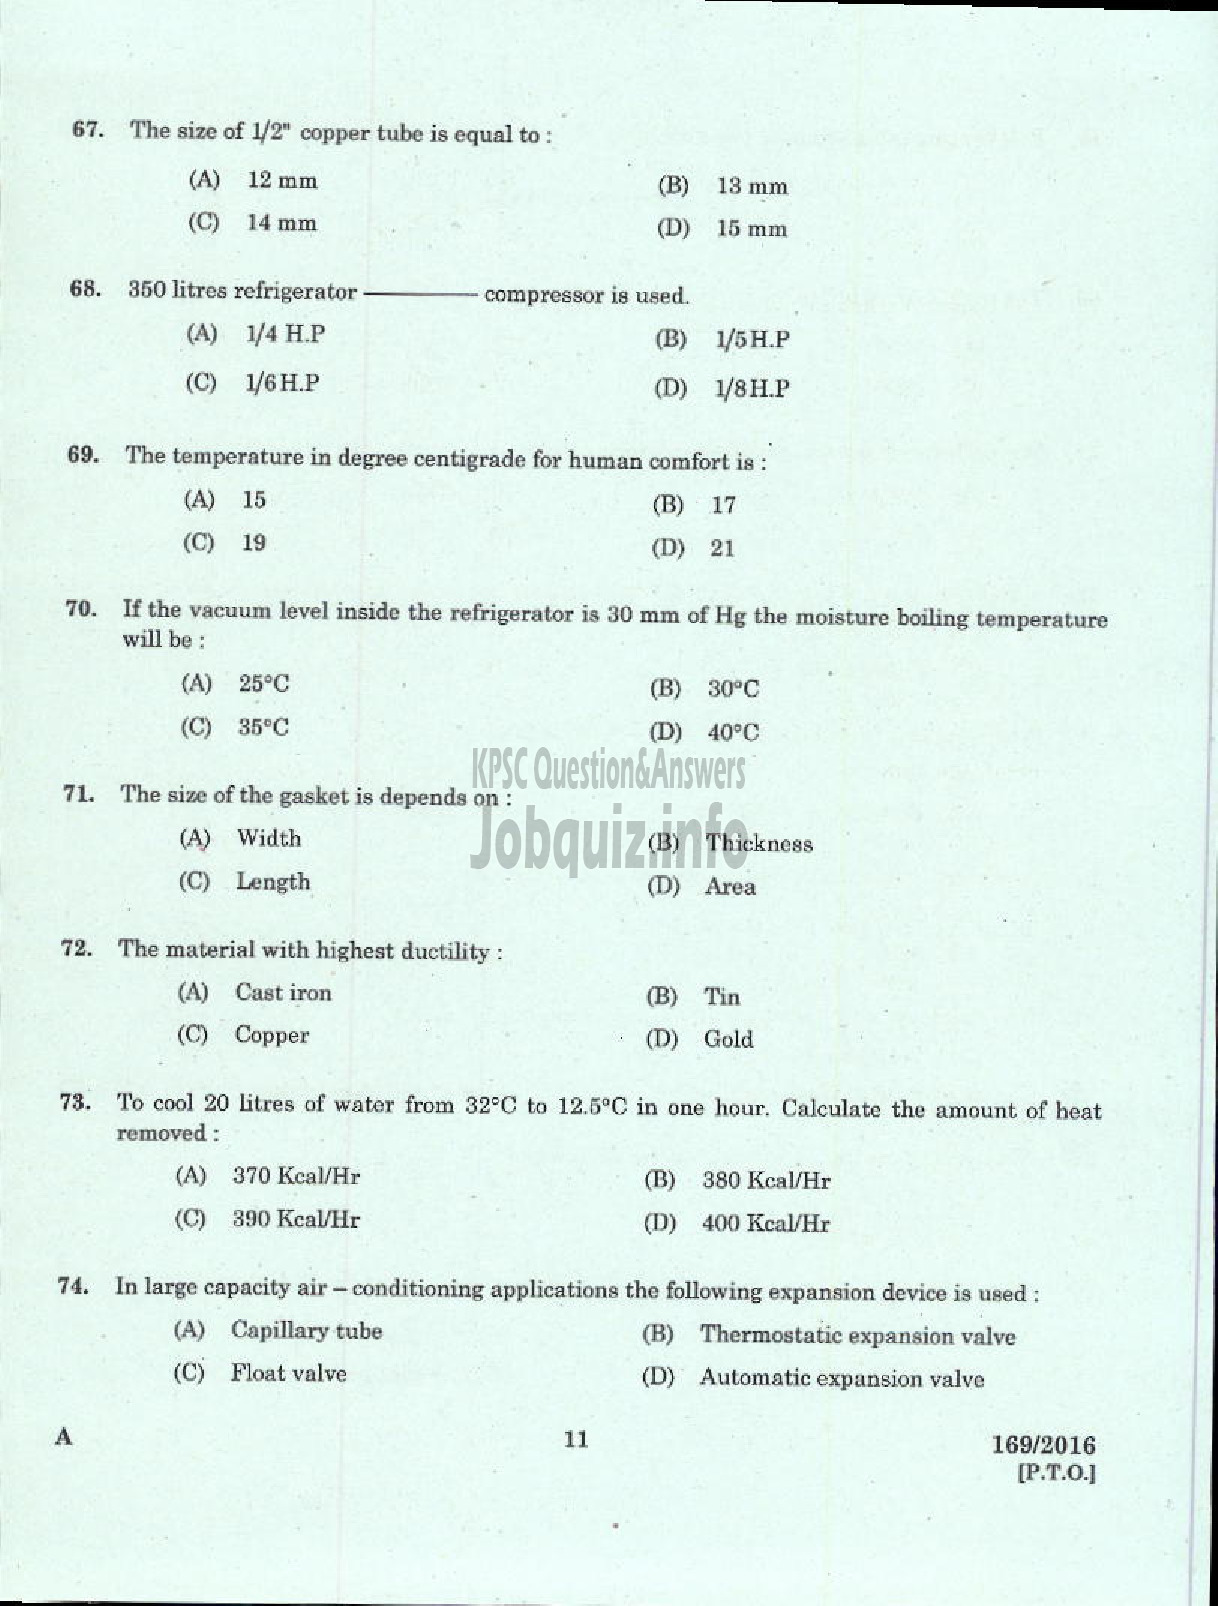 Kerala PSC Question Paper - TRADESMAN REFRIGERATION AND AIR CONDITIONING TECHNICAL EDUCATION-9